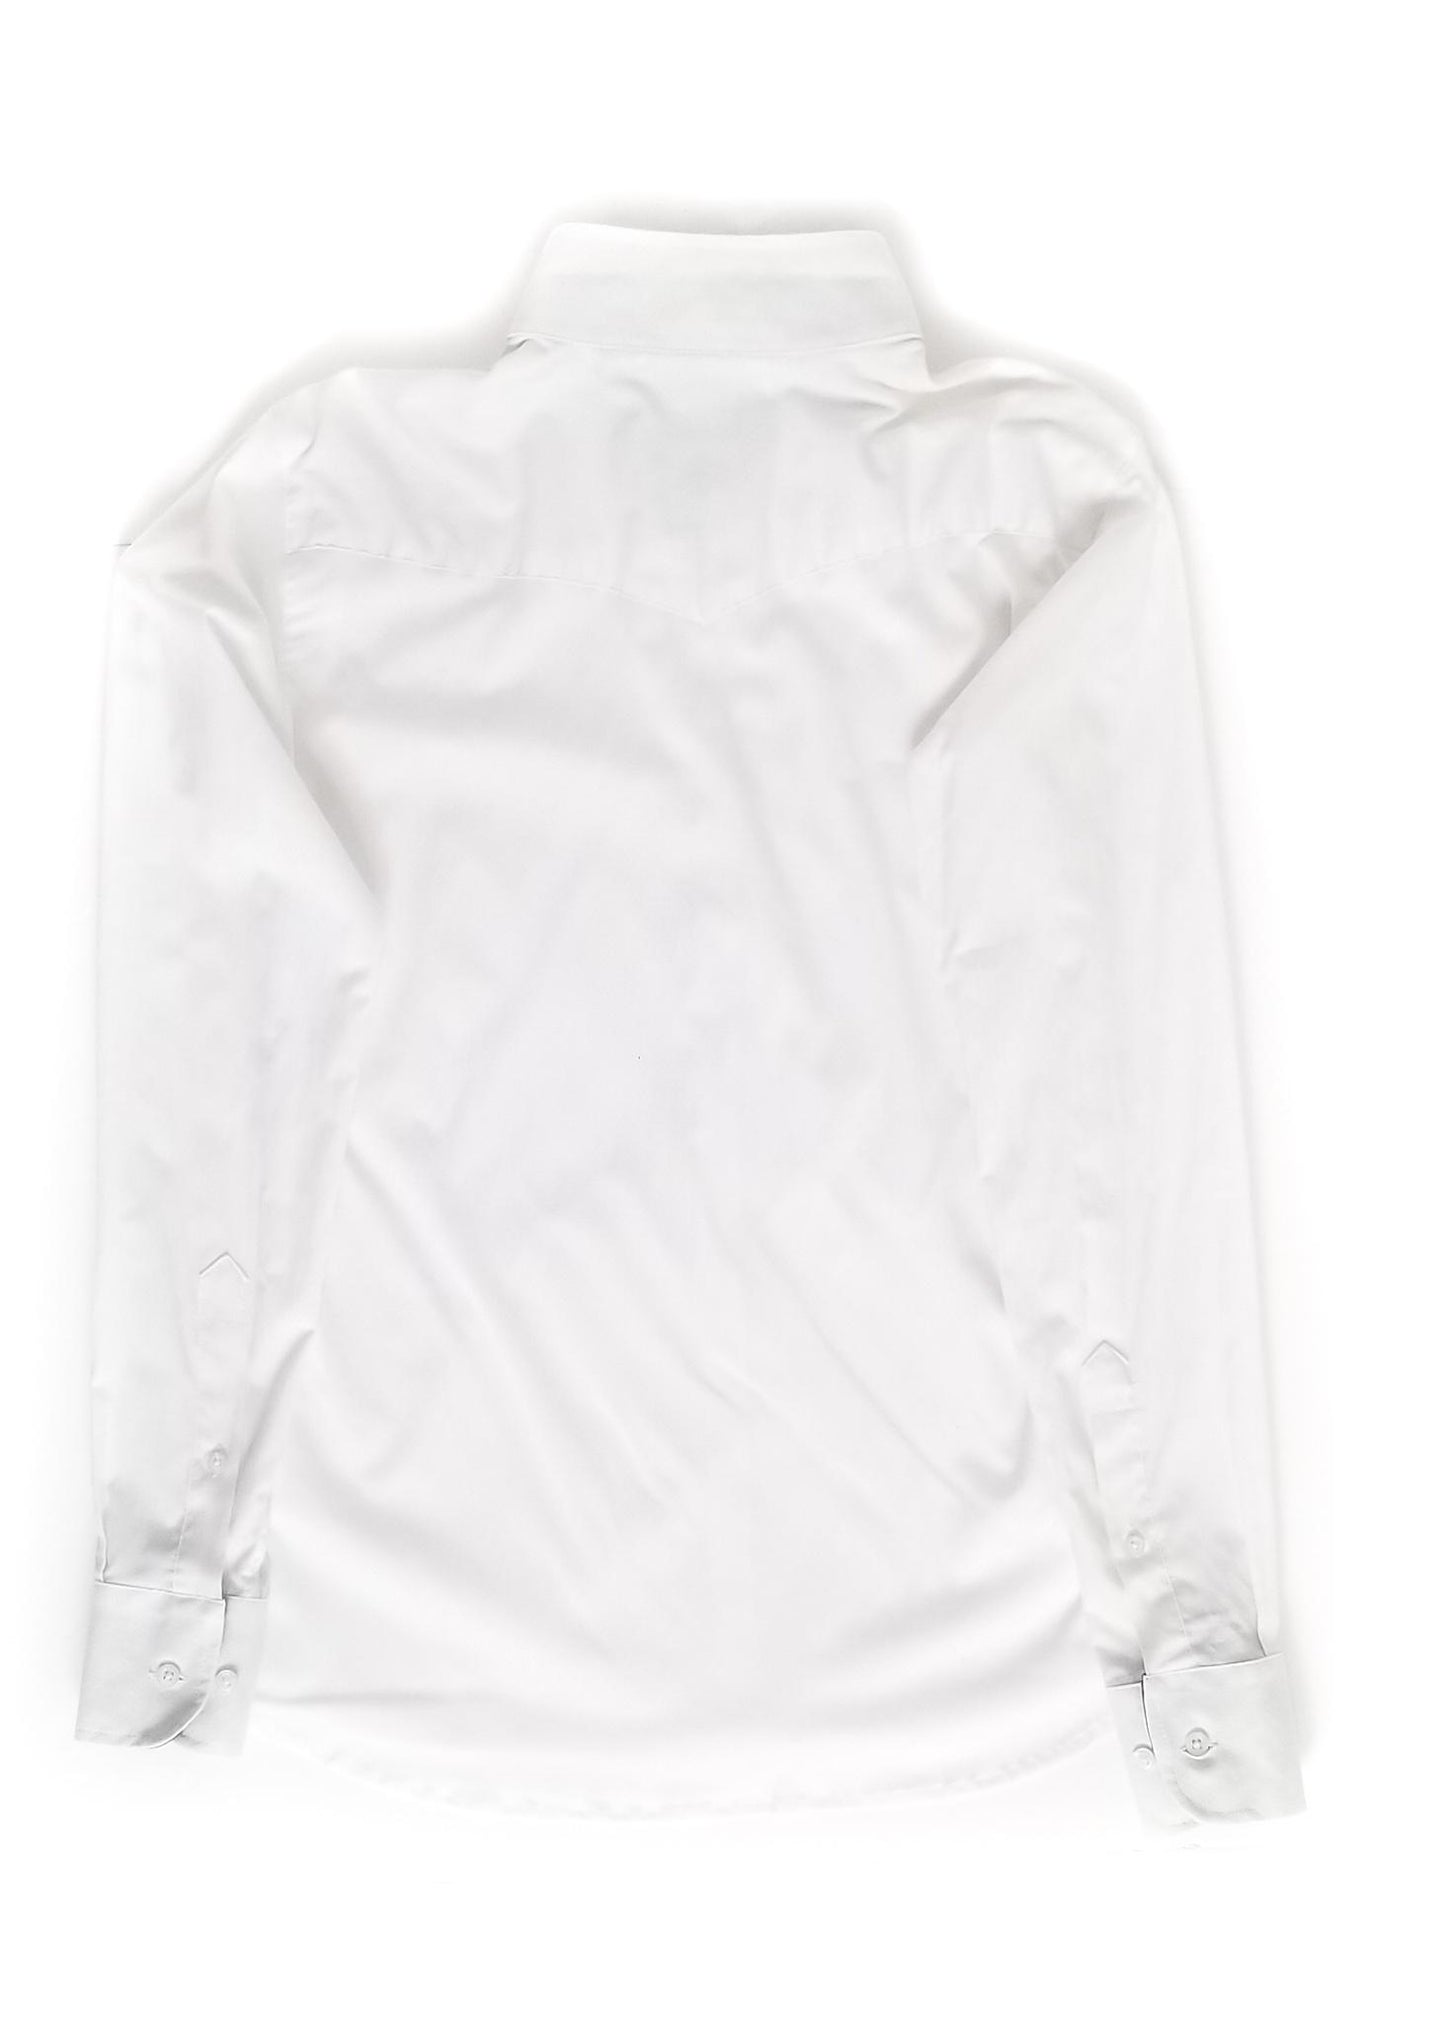 RJ Classics Sterling Collection Show Shirt - White - 34